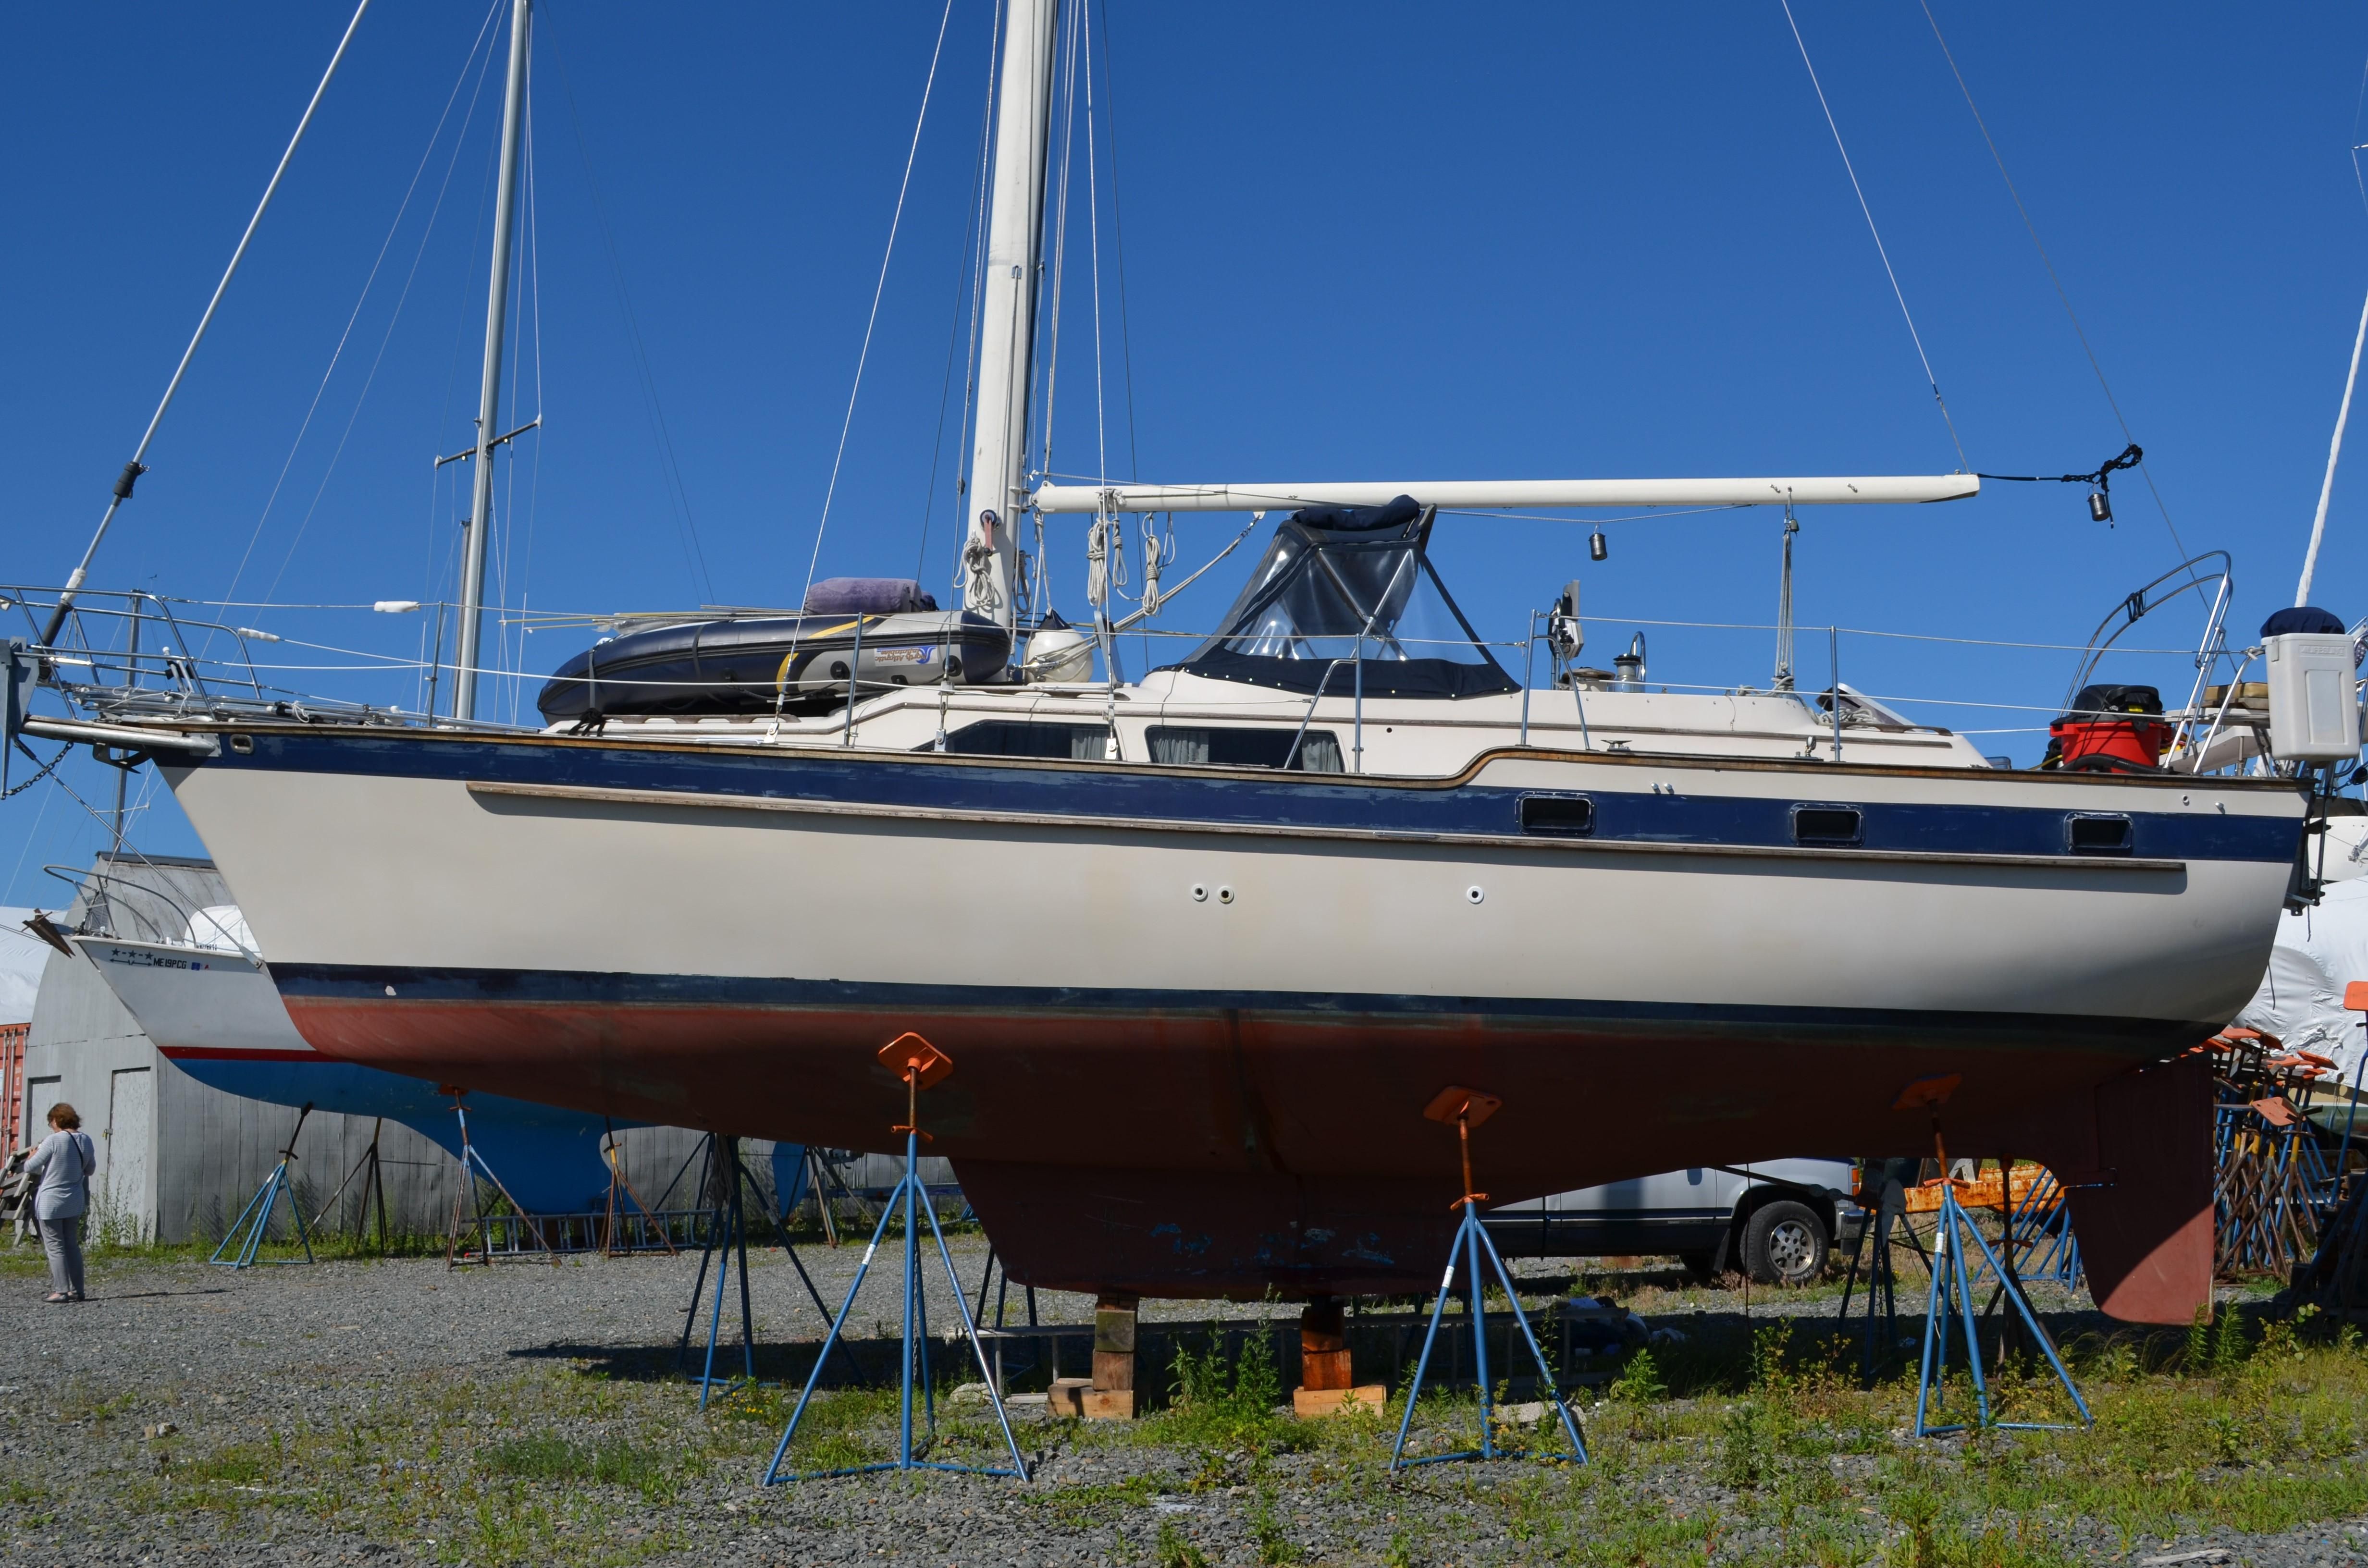 irwin sailboat for sale